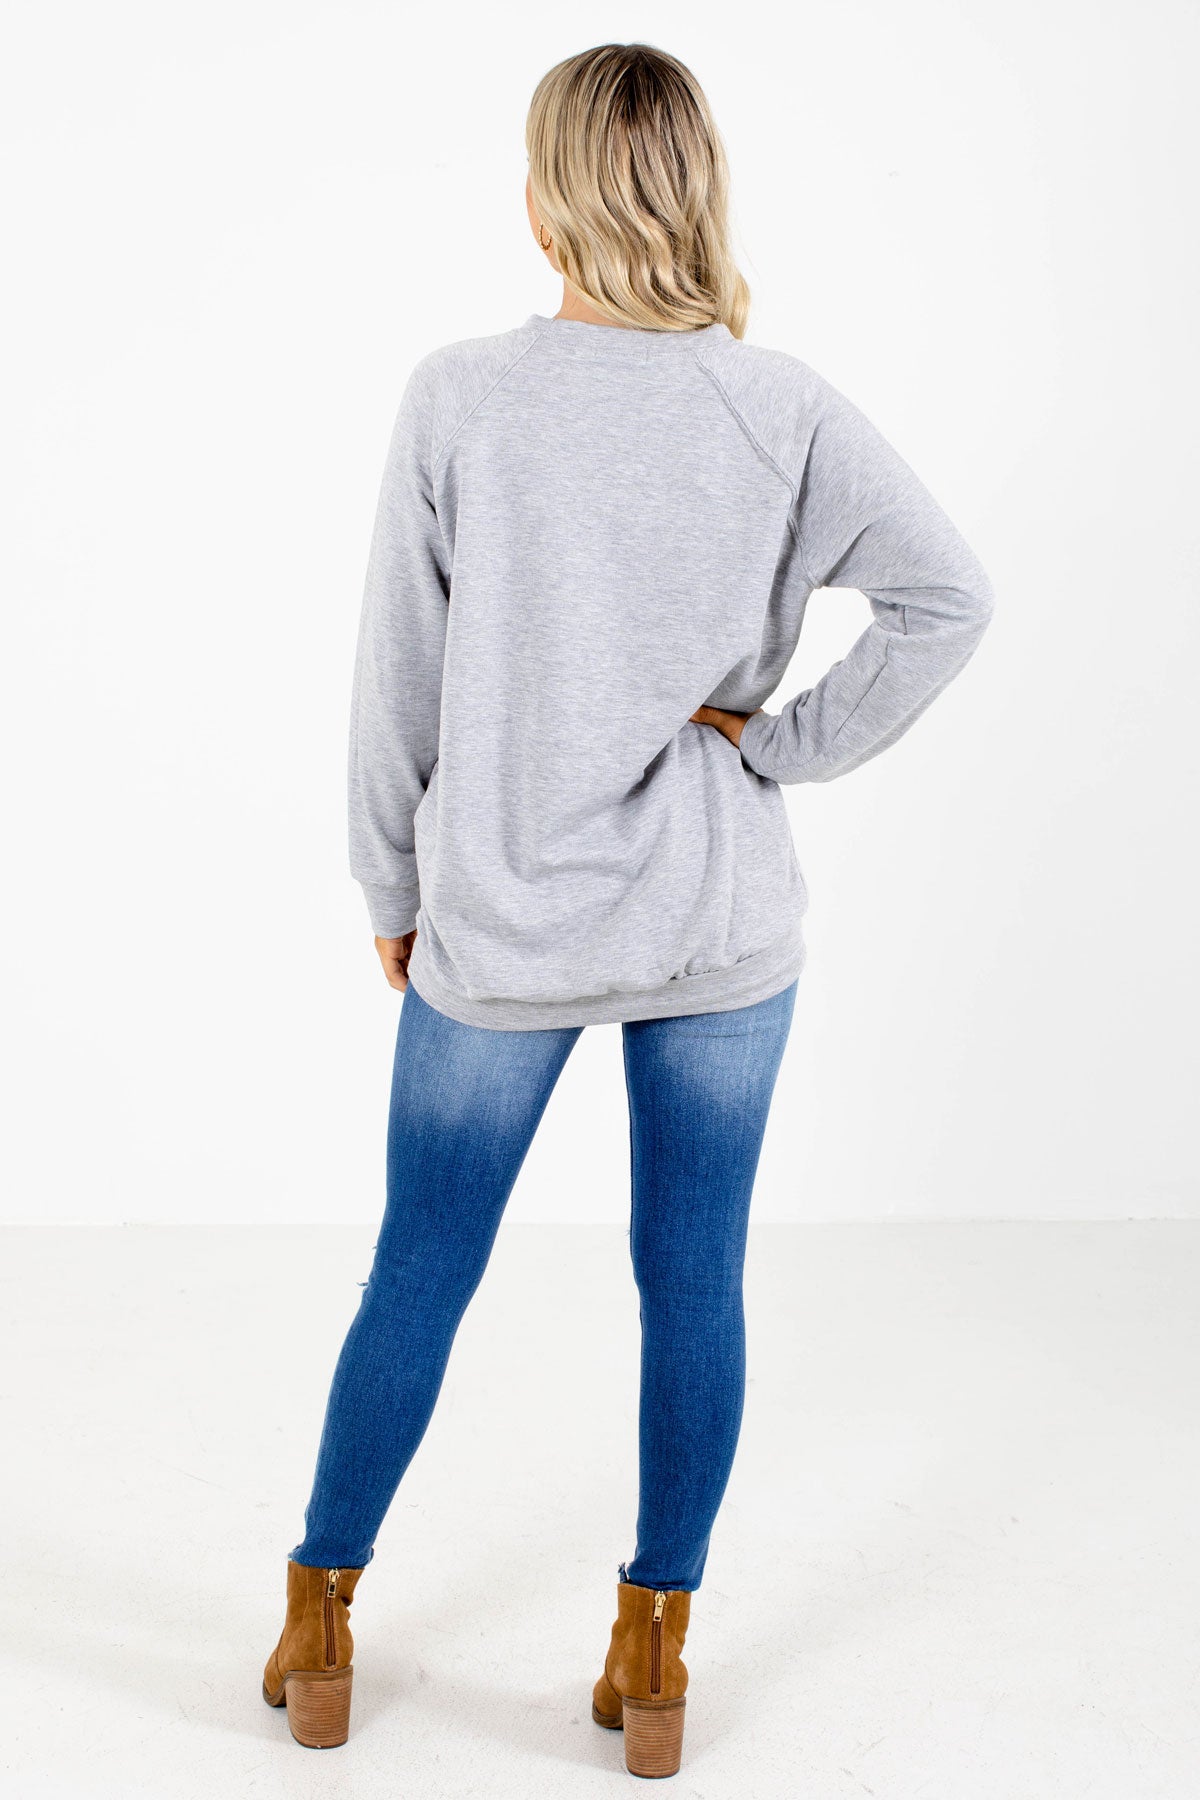 Striped Grey Boutique Sweaters For Women